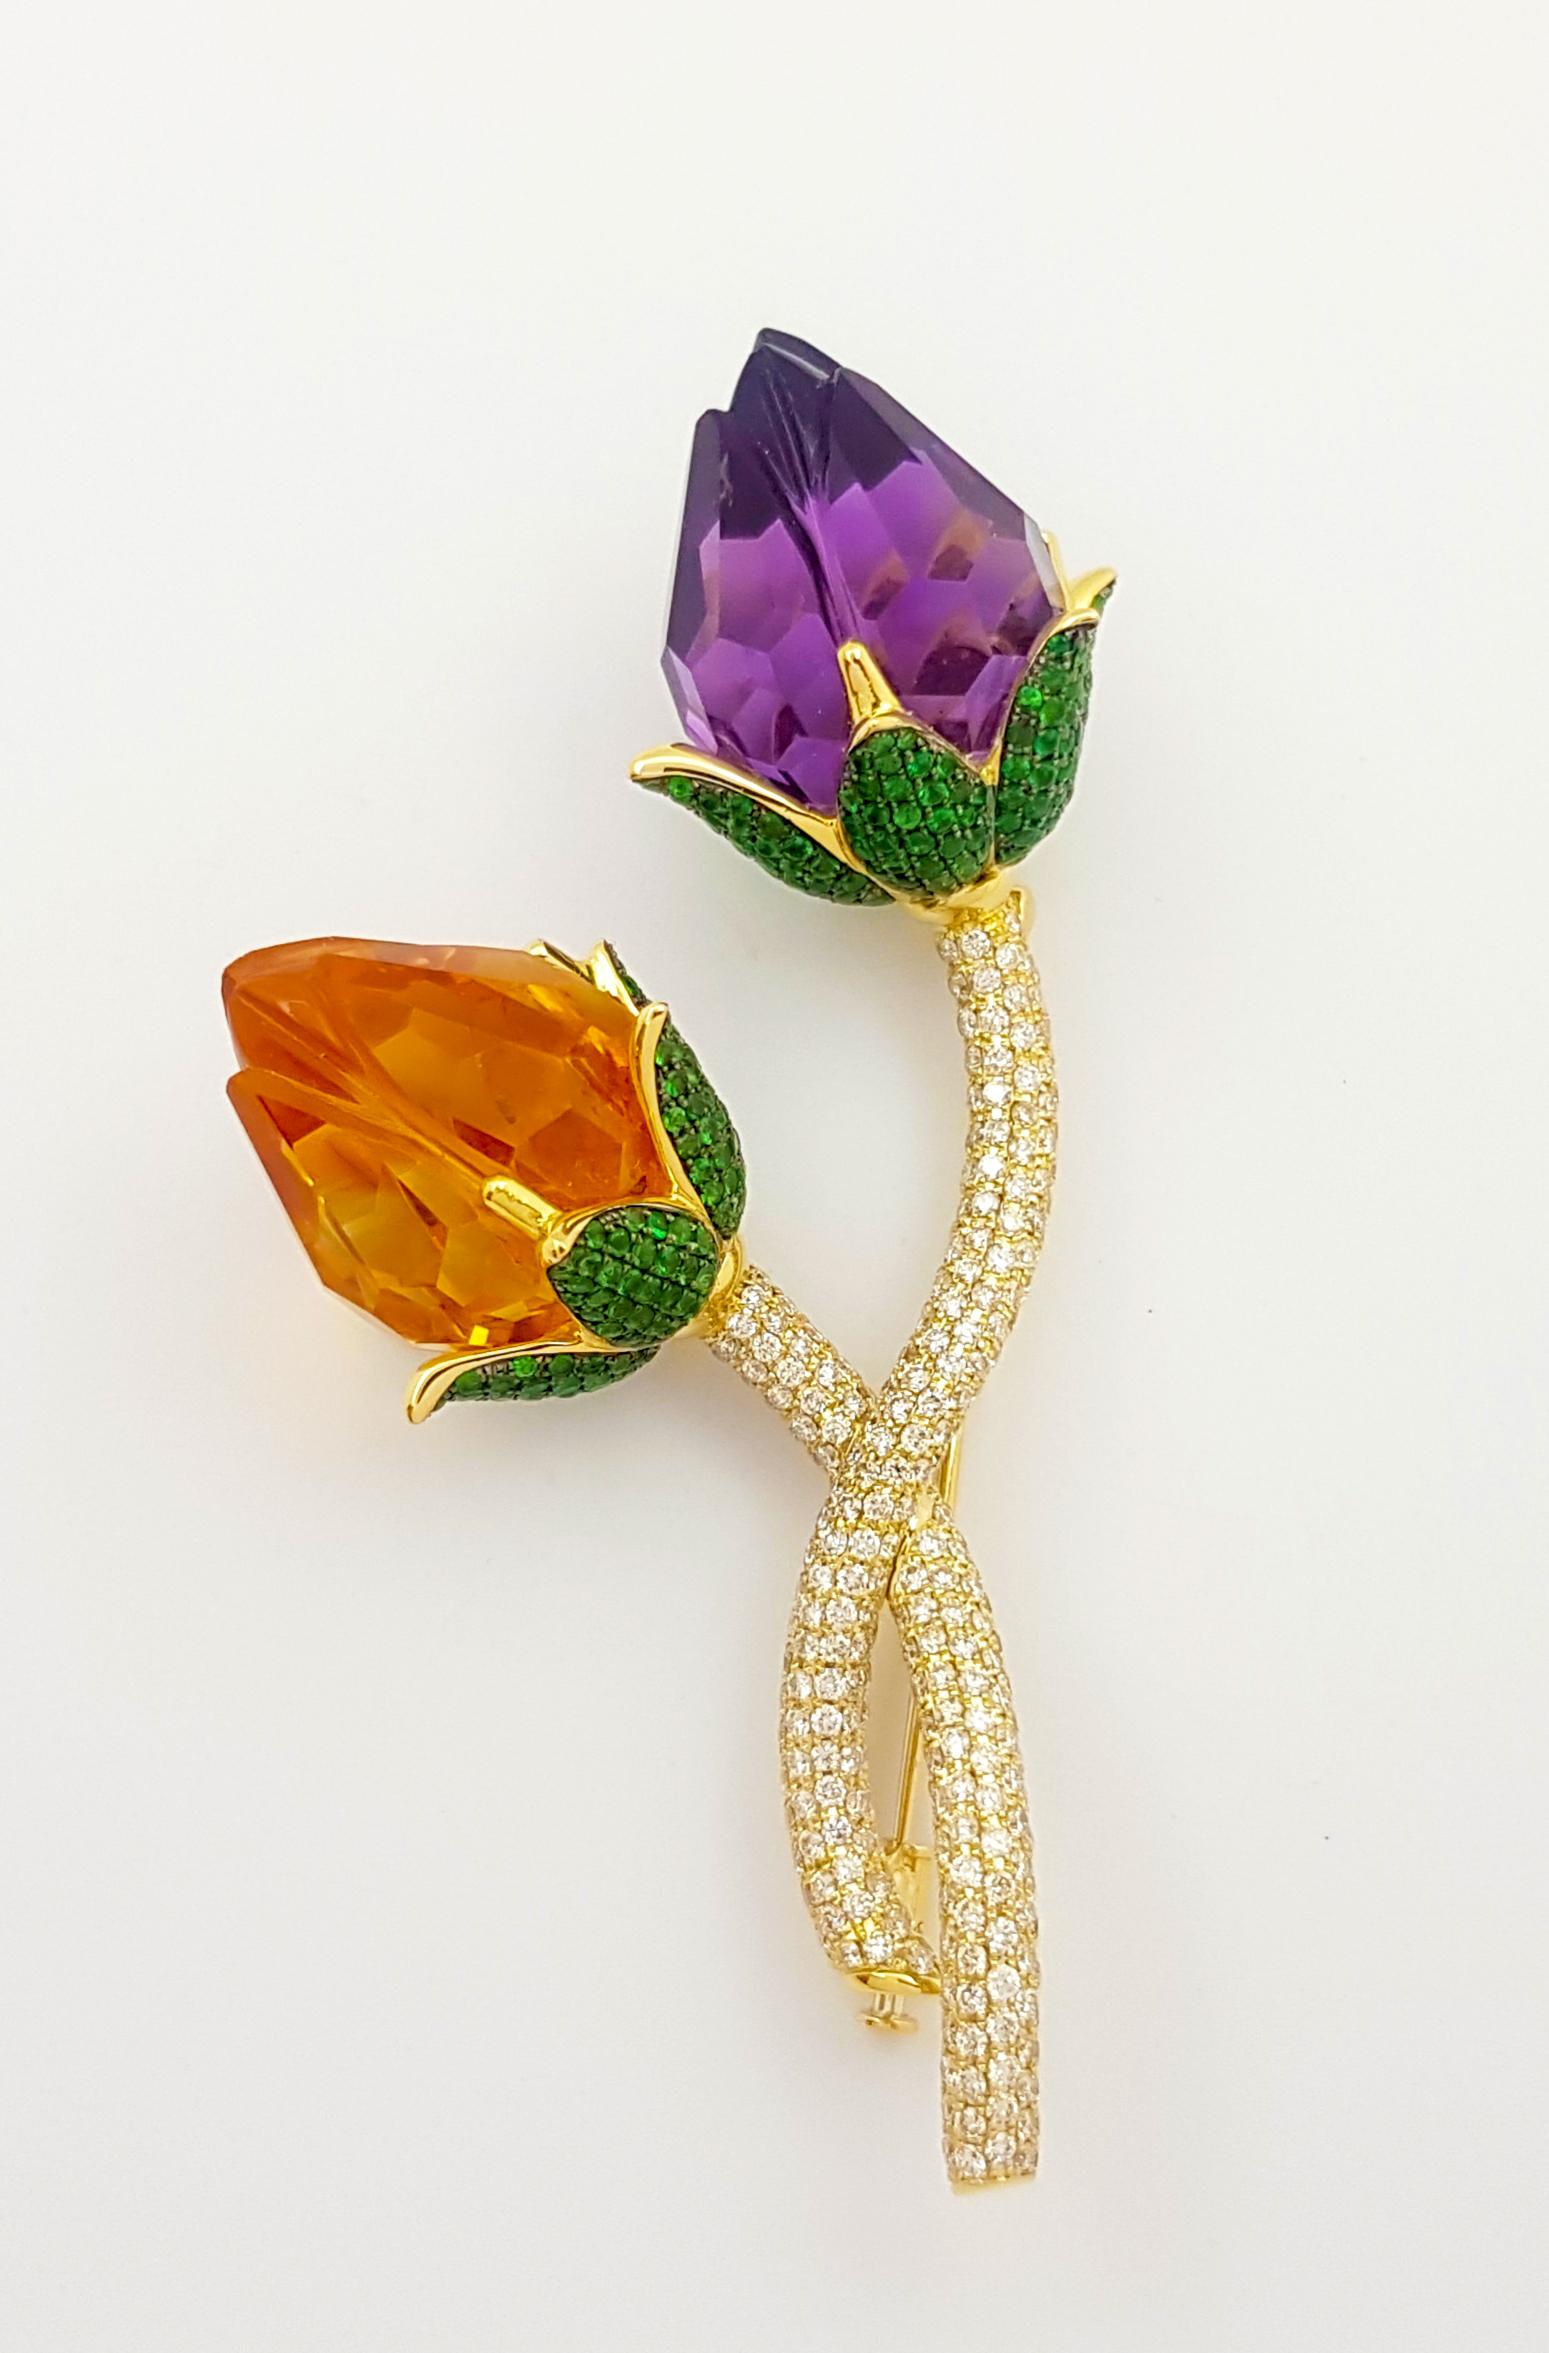 Citrine 51.67 carats, Amethyst 54.78 carats, Tsavorite 4.46 carats and Brown Diamond 3.97 carats Brooch set in 18K Gold Settings

Width: 5.5 cm 
Length: 9.0 cm
Total Weight: 61.03 grams

